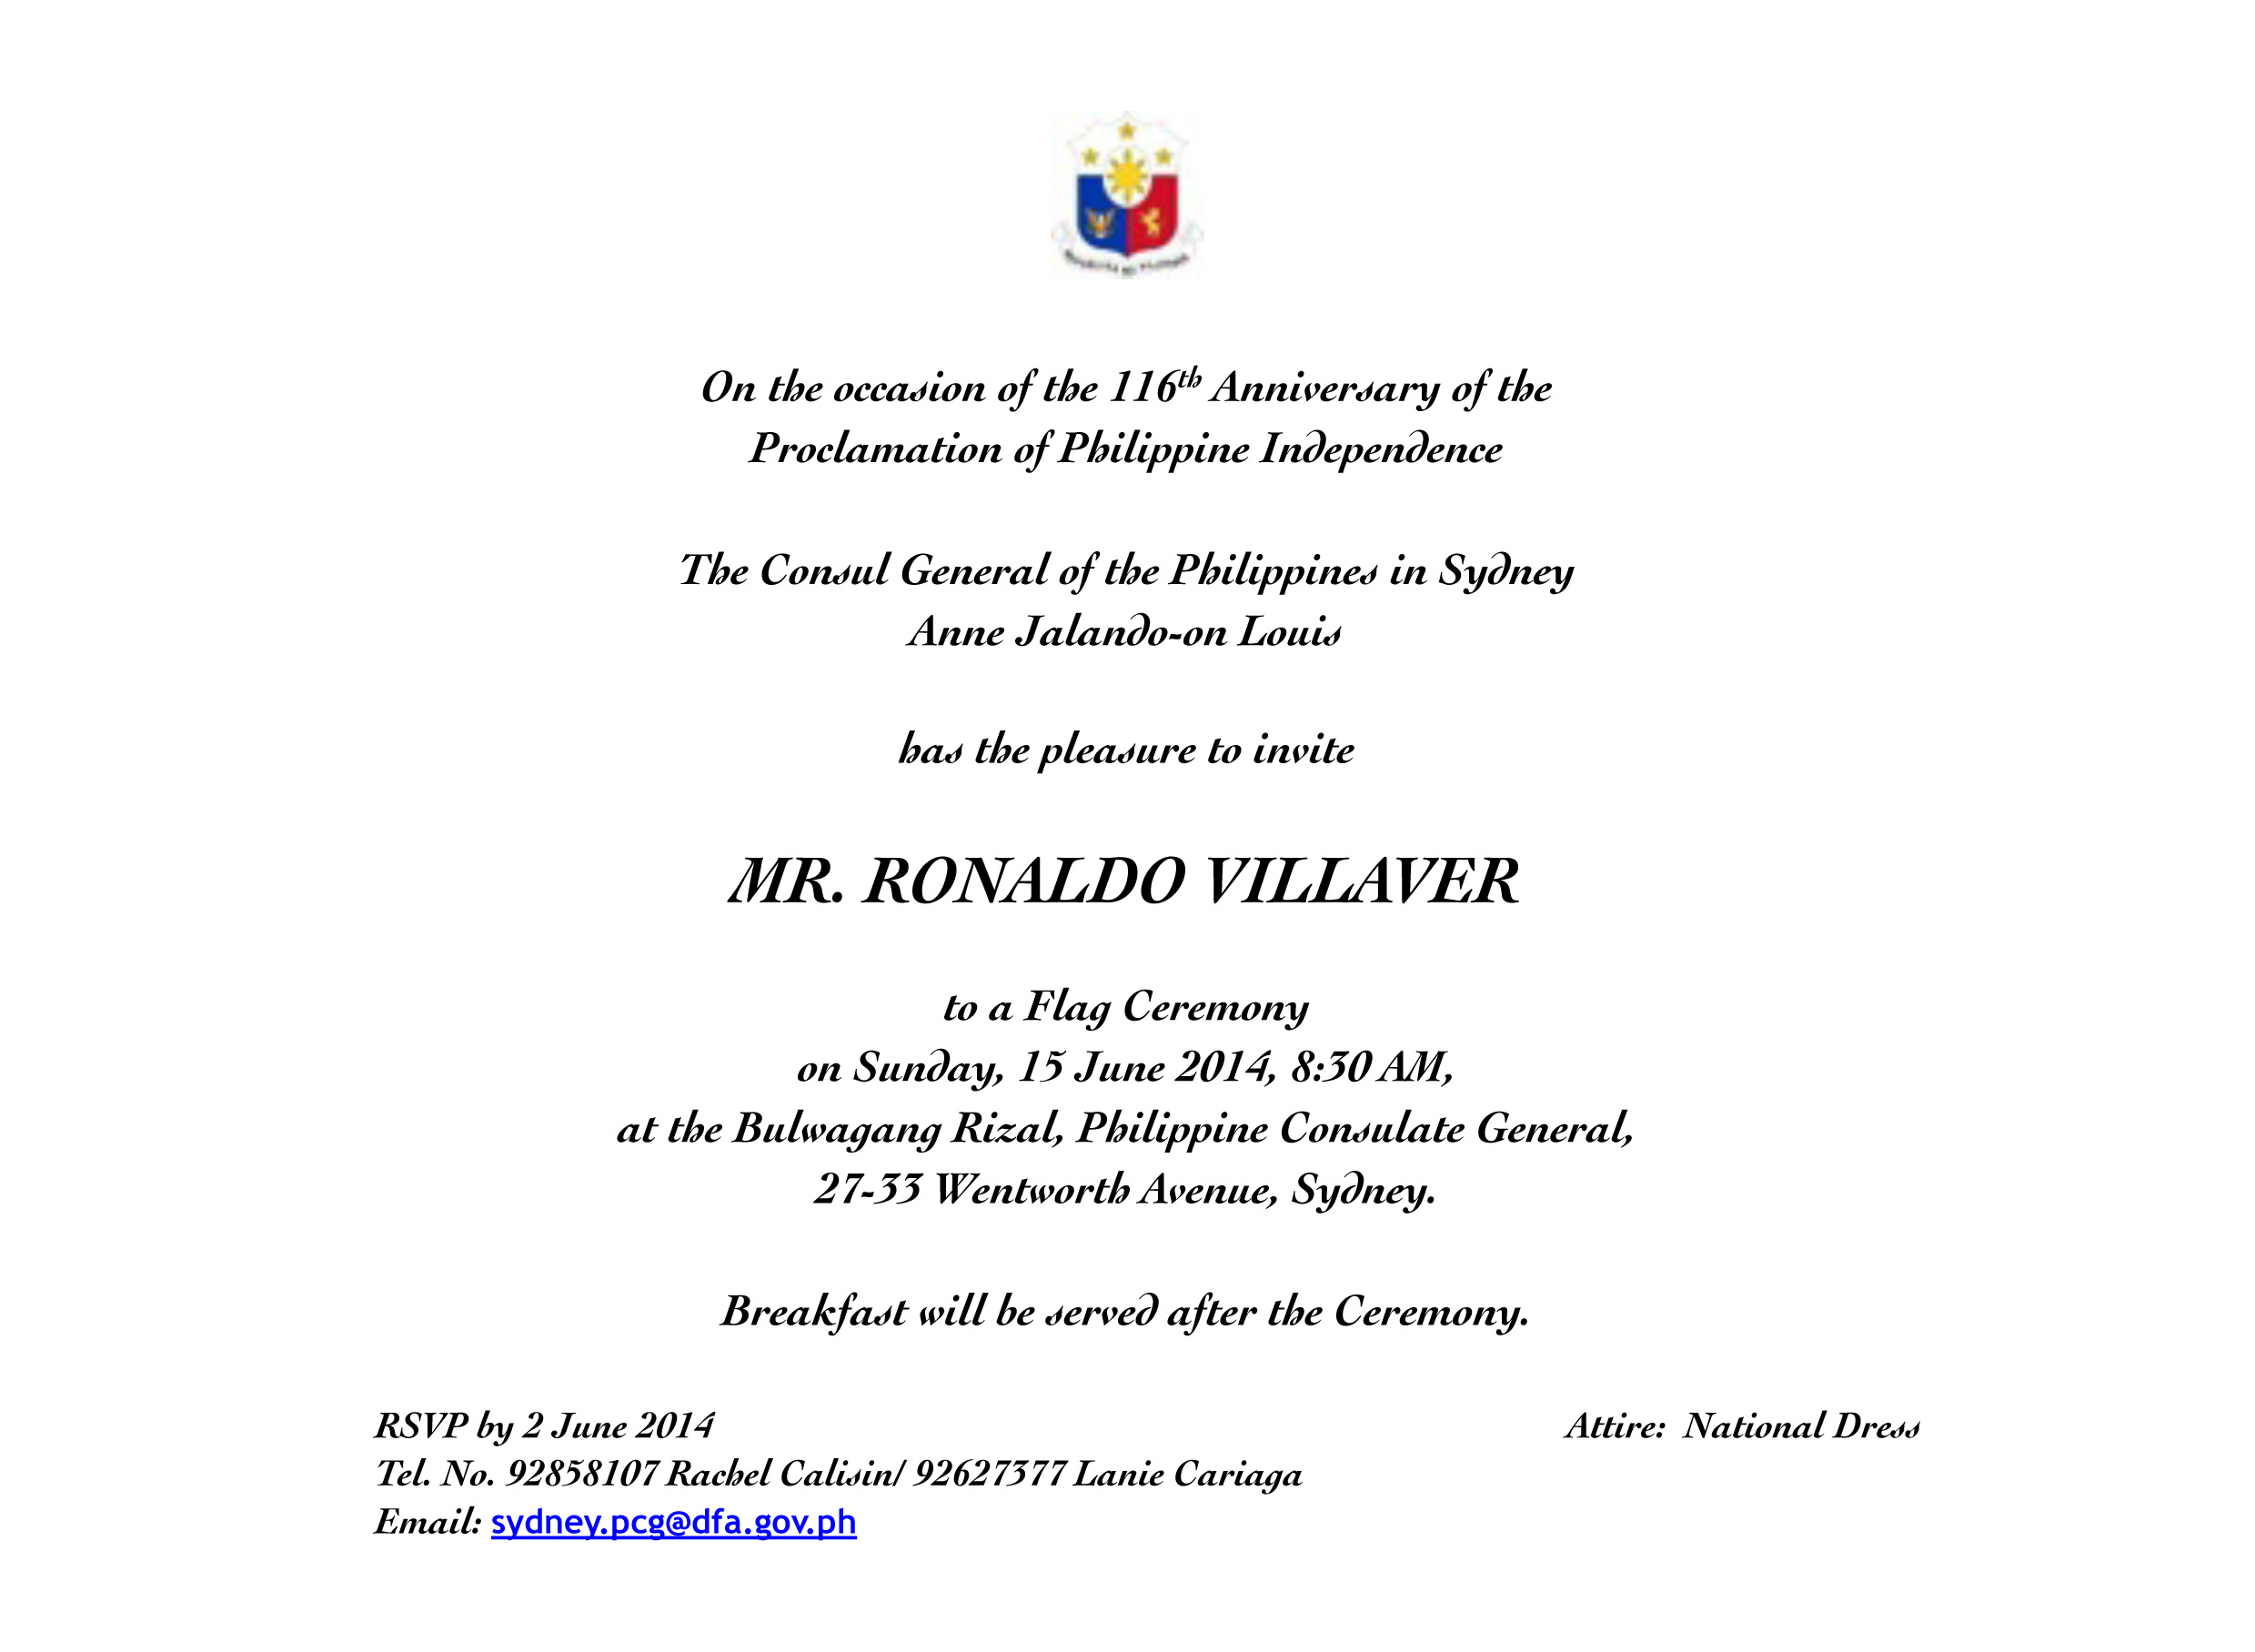 Invitation - Flag Raising at the Bulwagang Rizal, Philippine Consulate General Sydney on 15 June 2014.